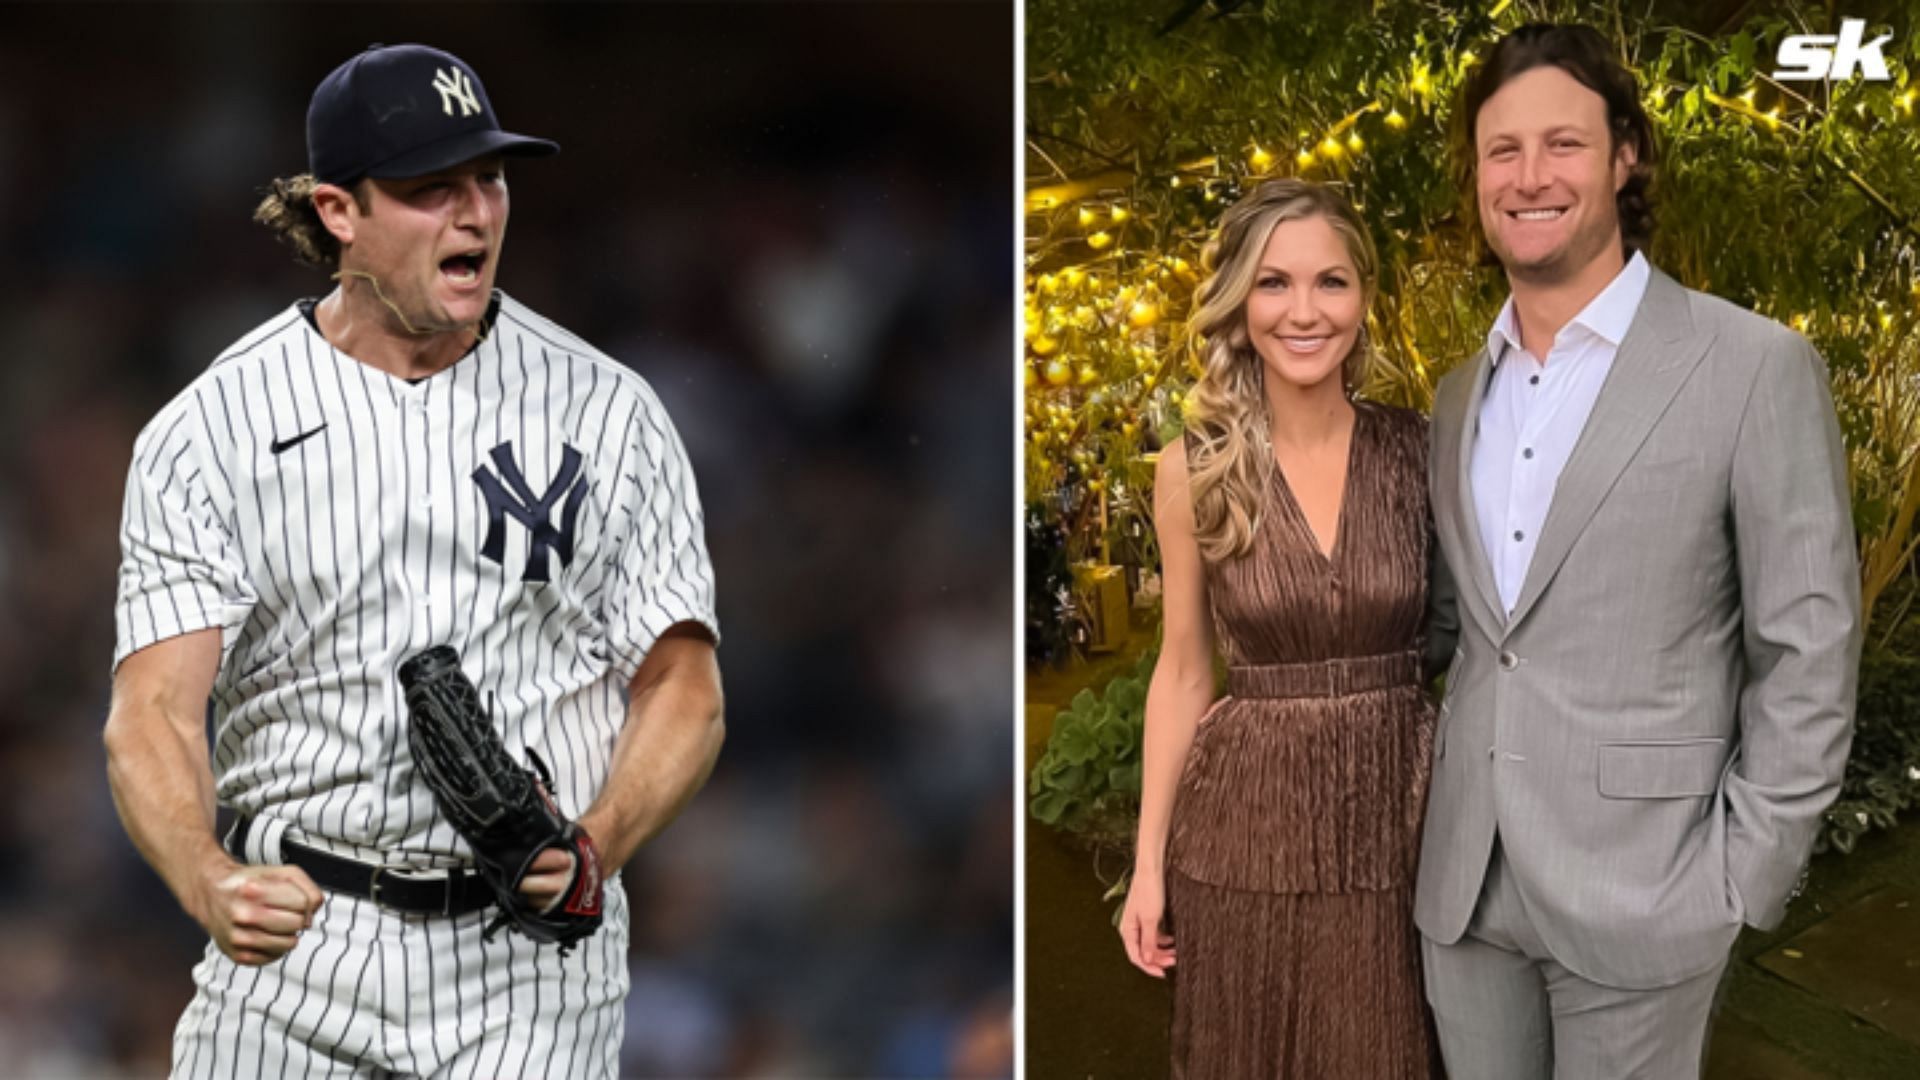 New York Yankees pitcher Gerrit Cole poses for a photo with wife Amy Cole